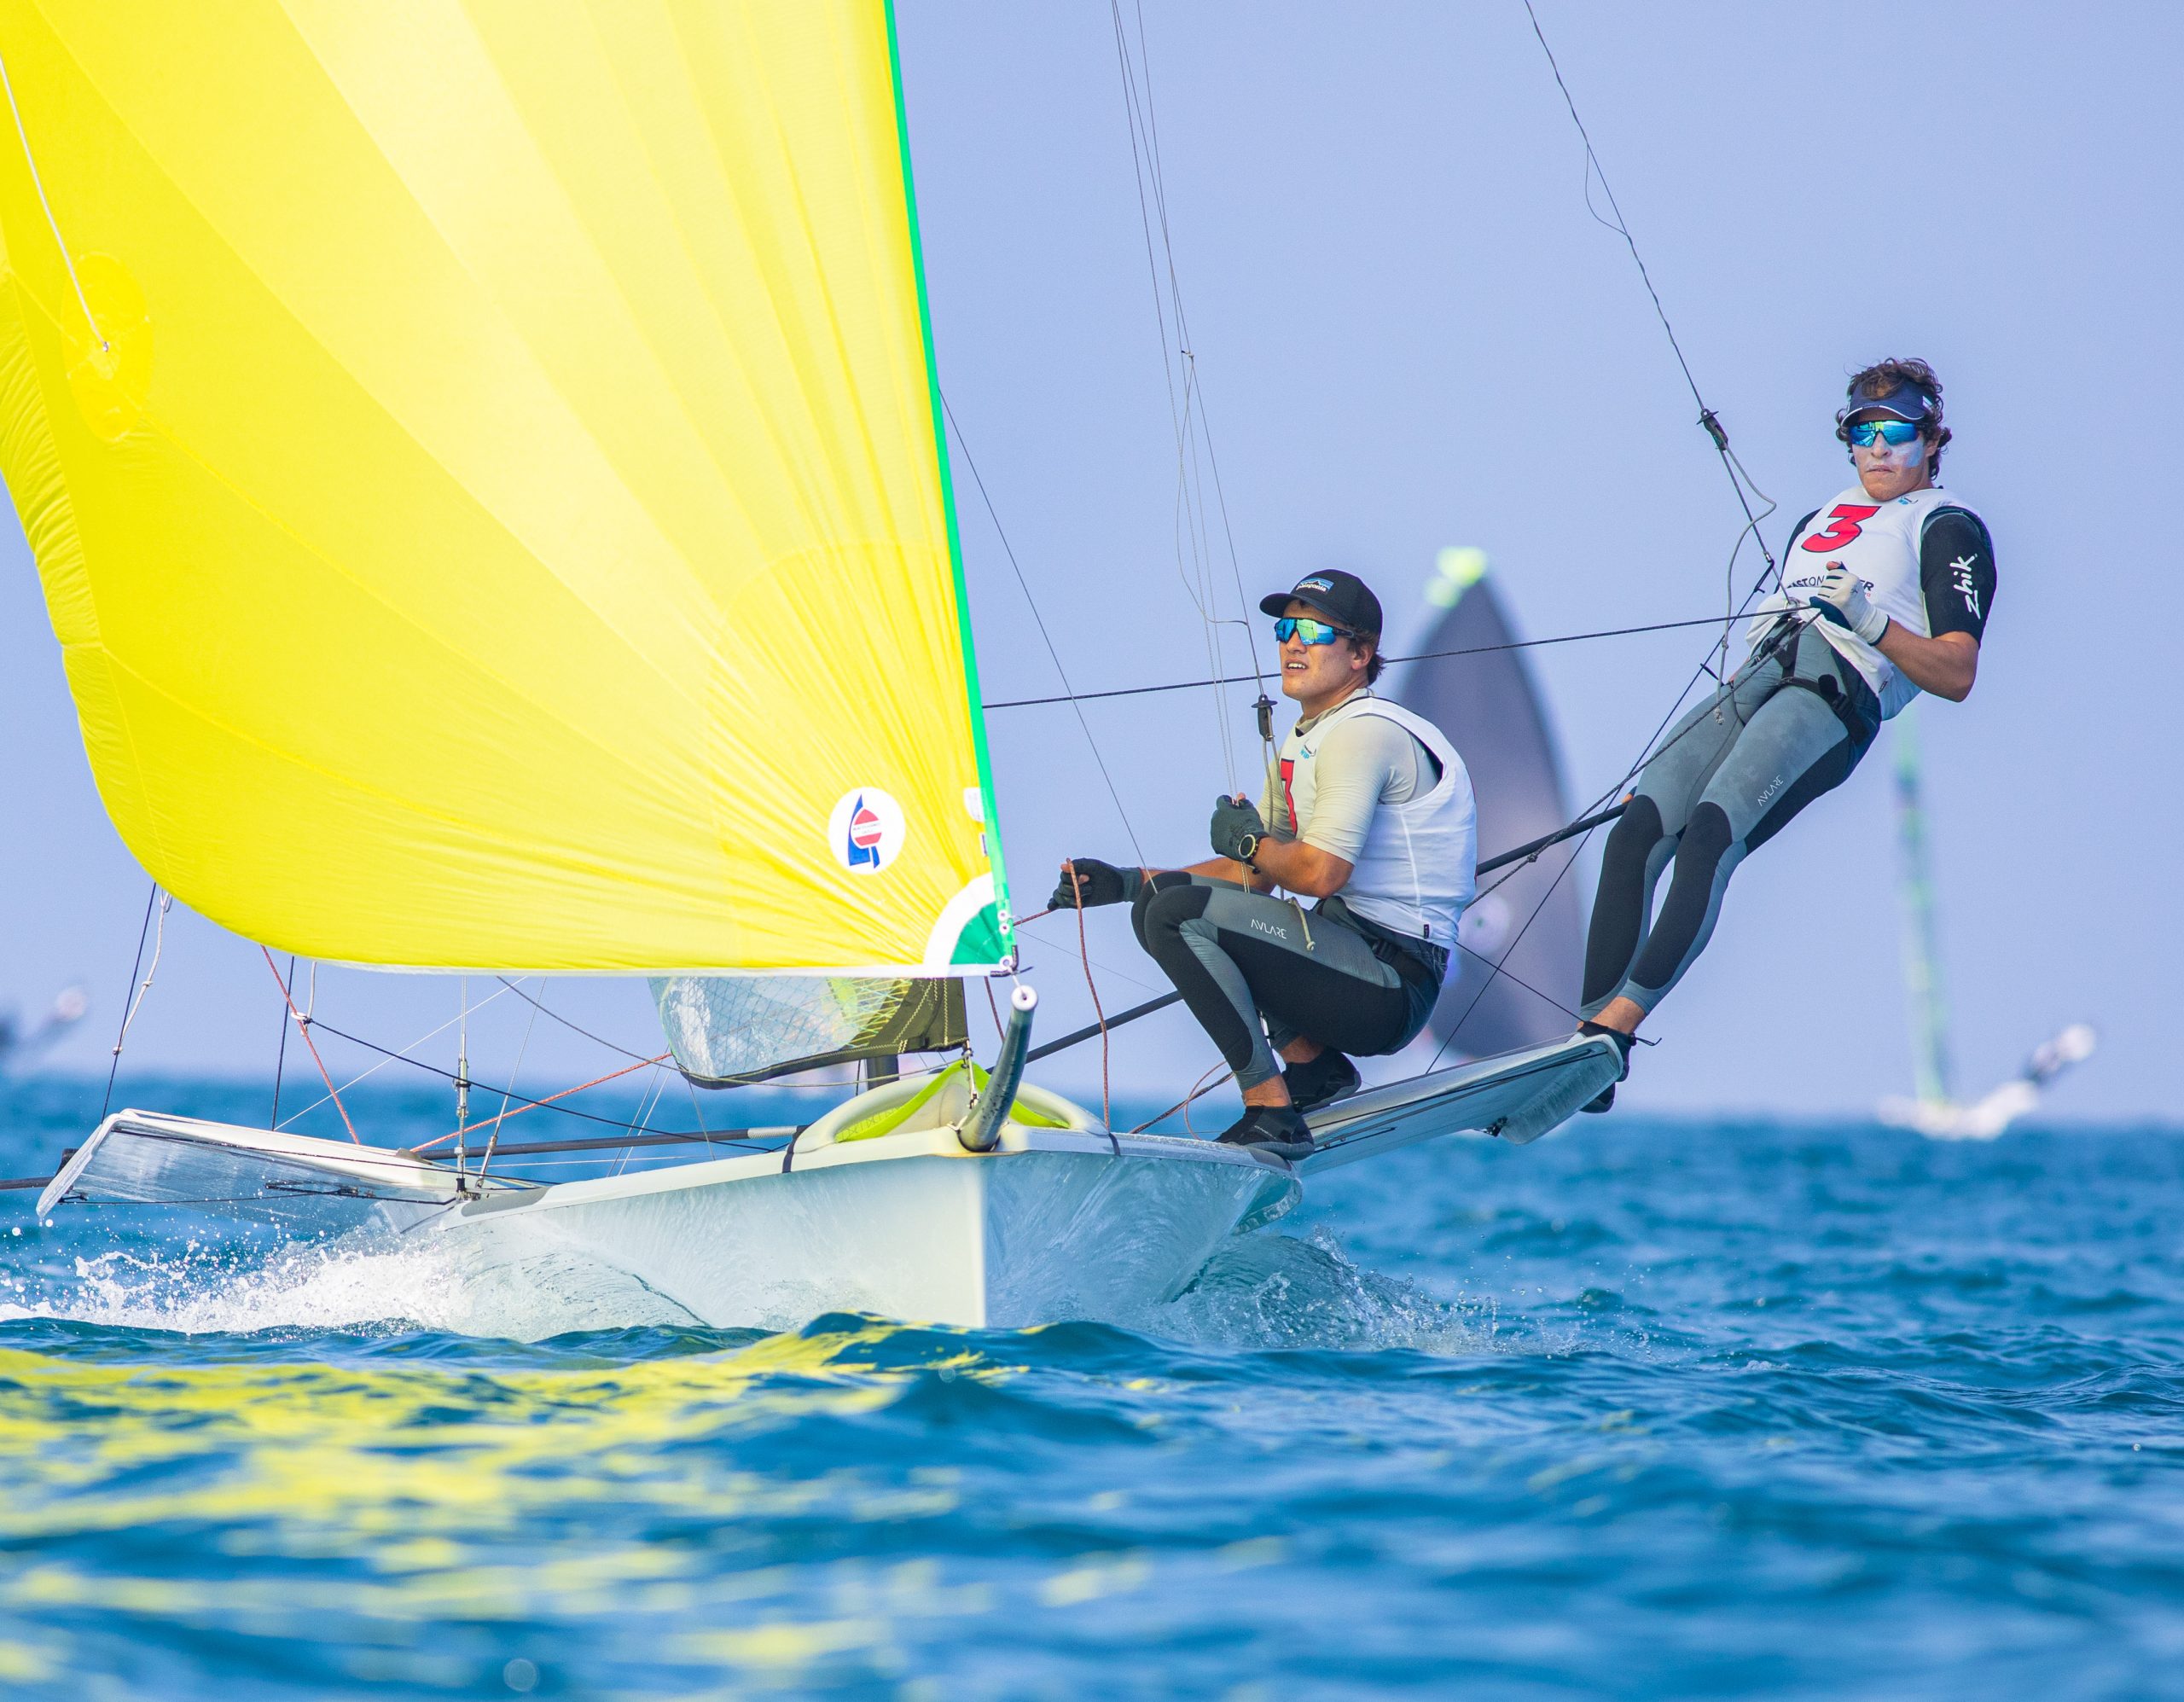 Asian Championship Decided in Lead Up to Oman Worlds